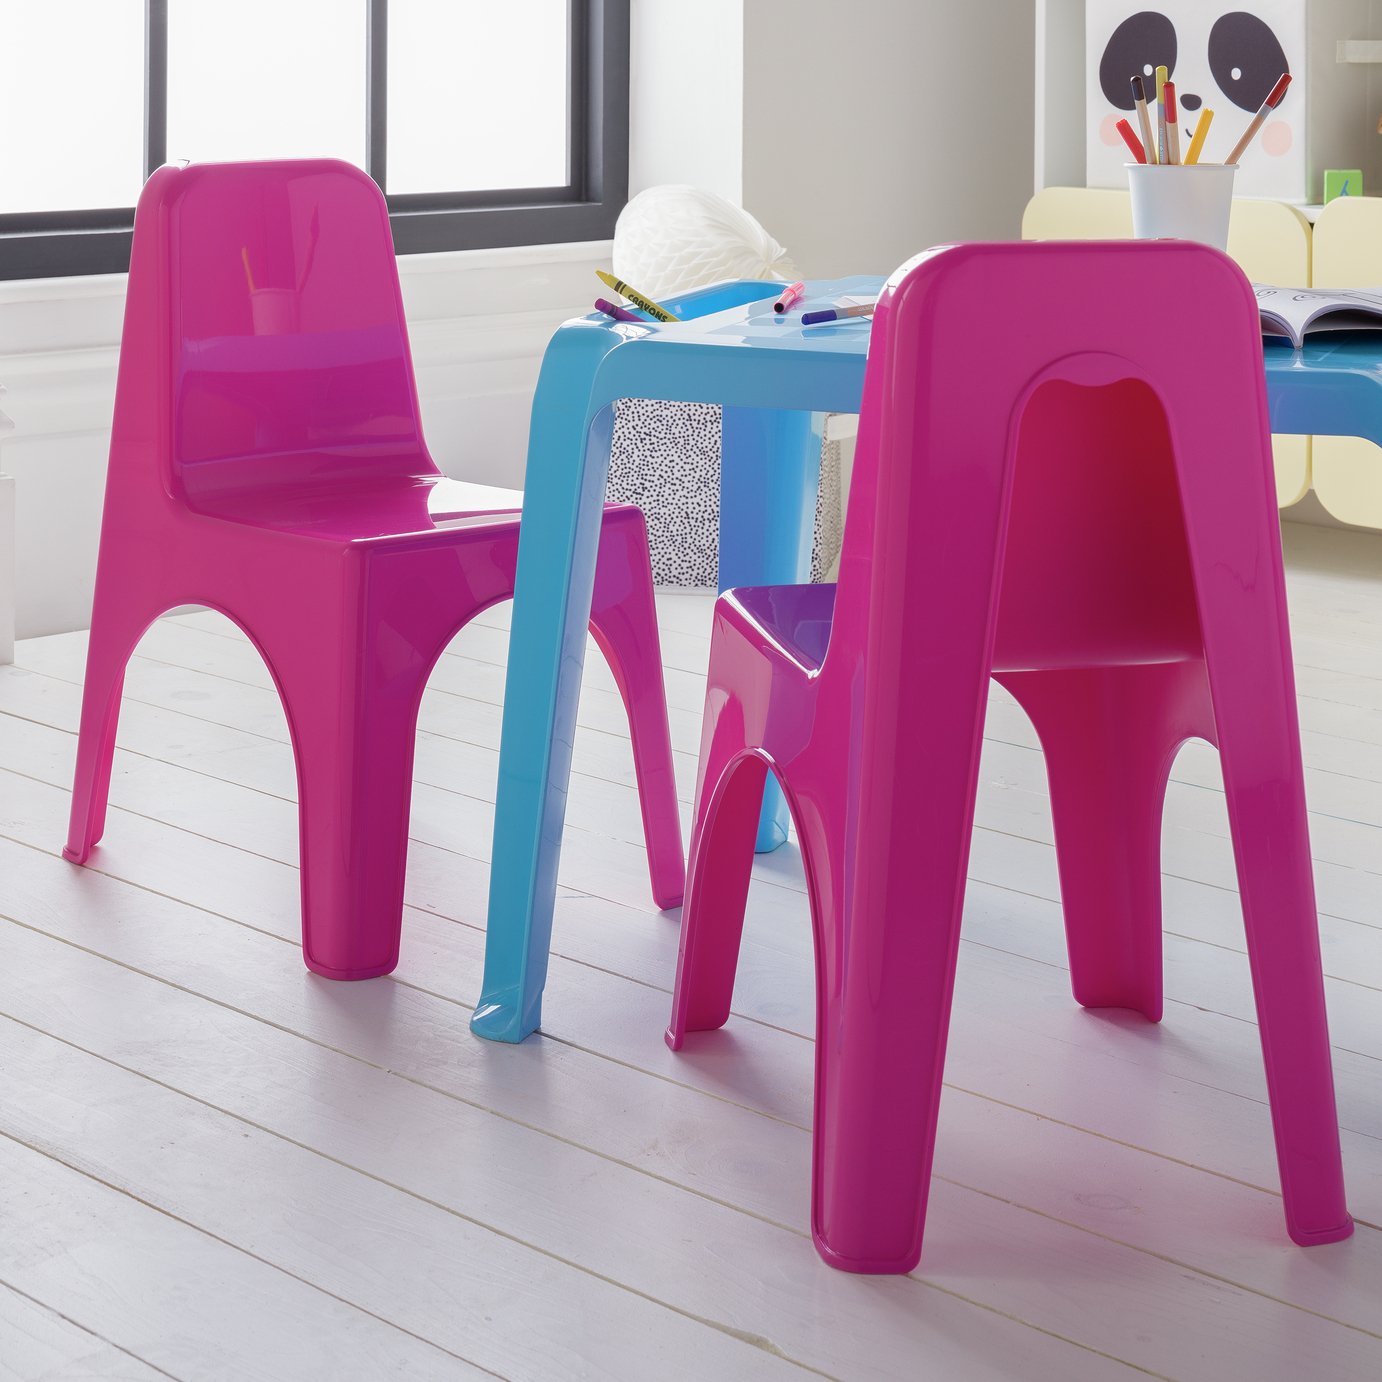 argos childrens plastic table and chairs